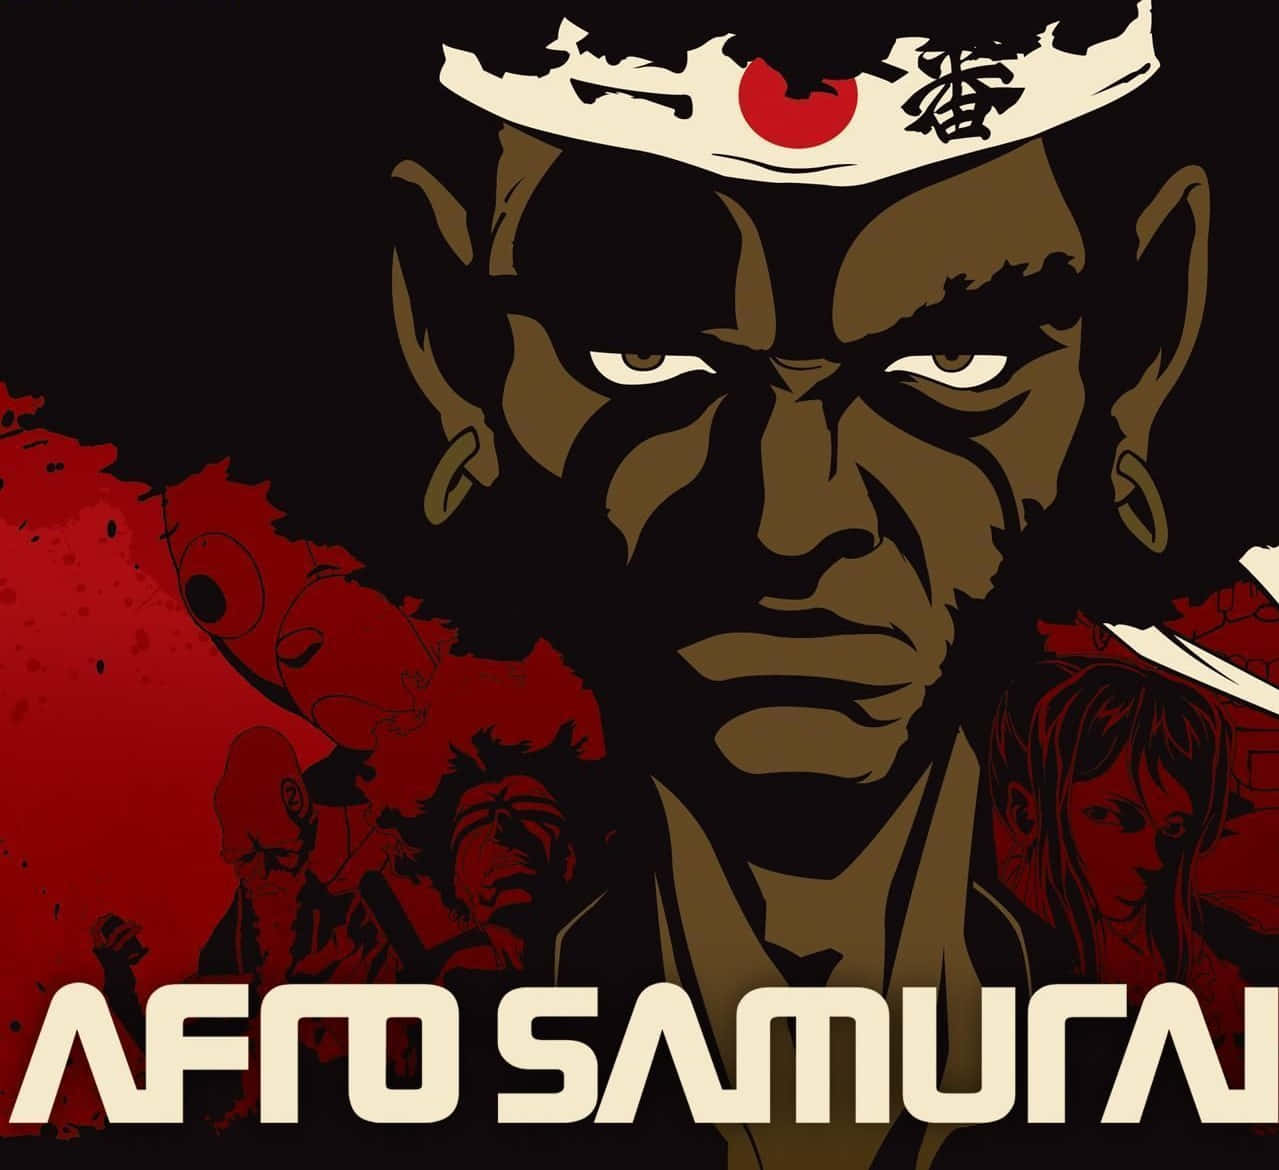 Afro Samurai in a powerful action stance Wallpaper